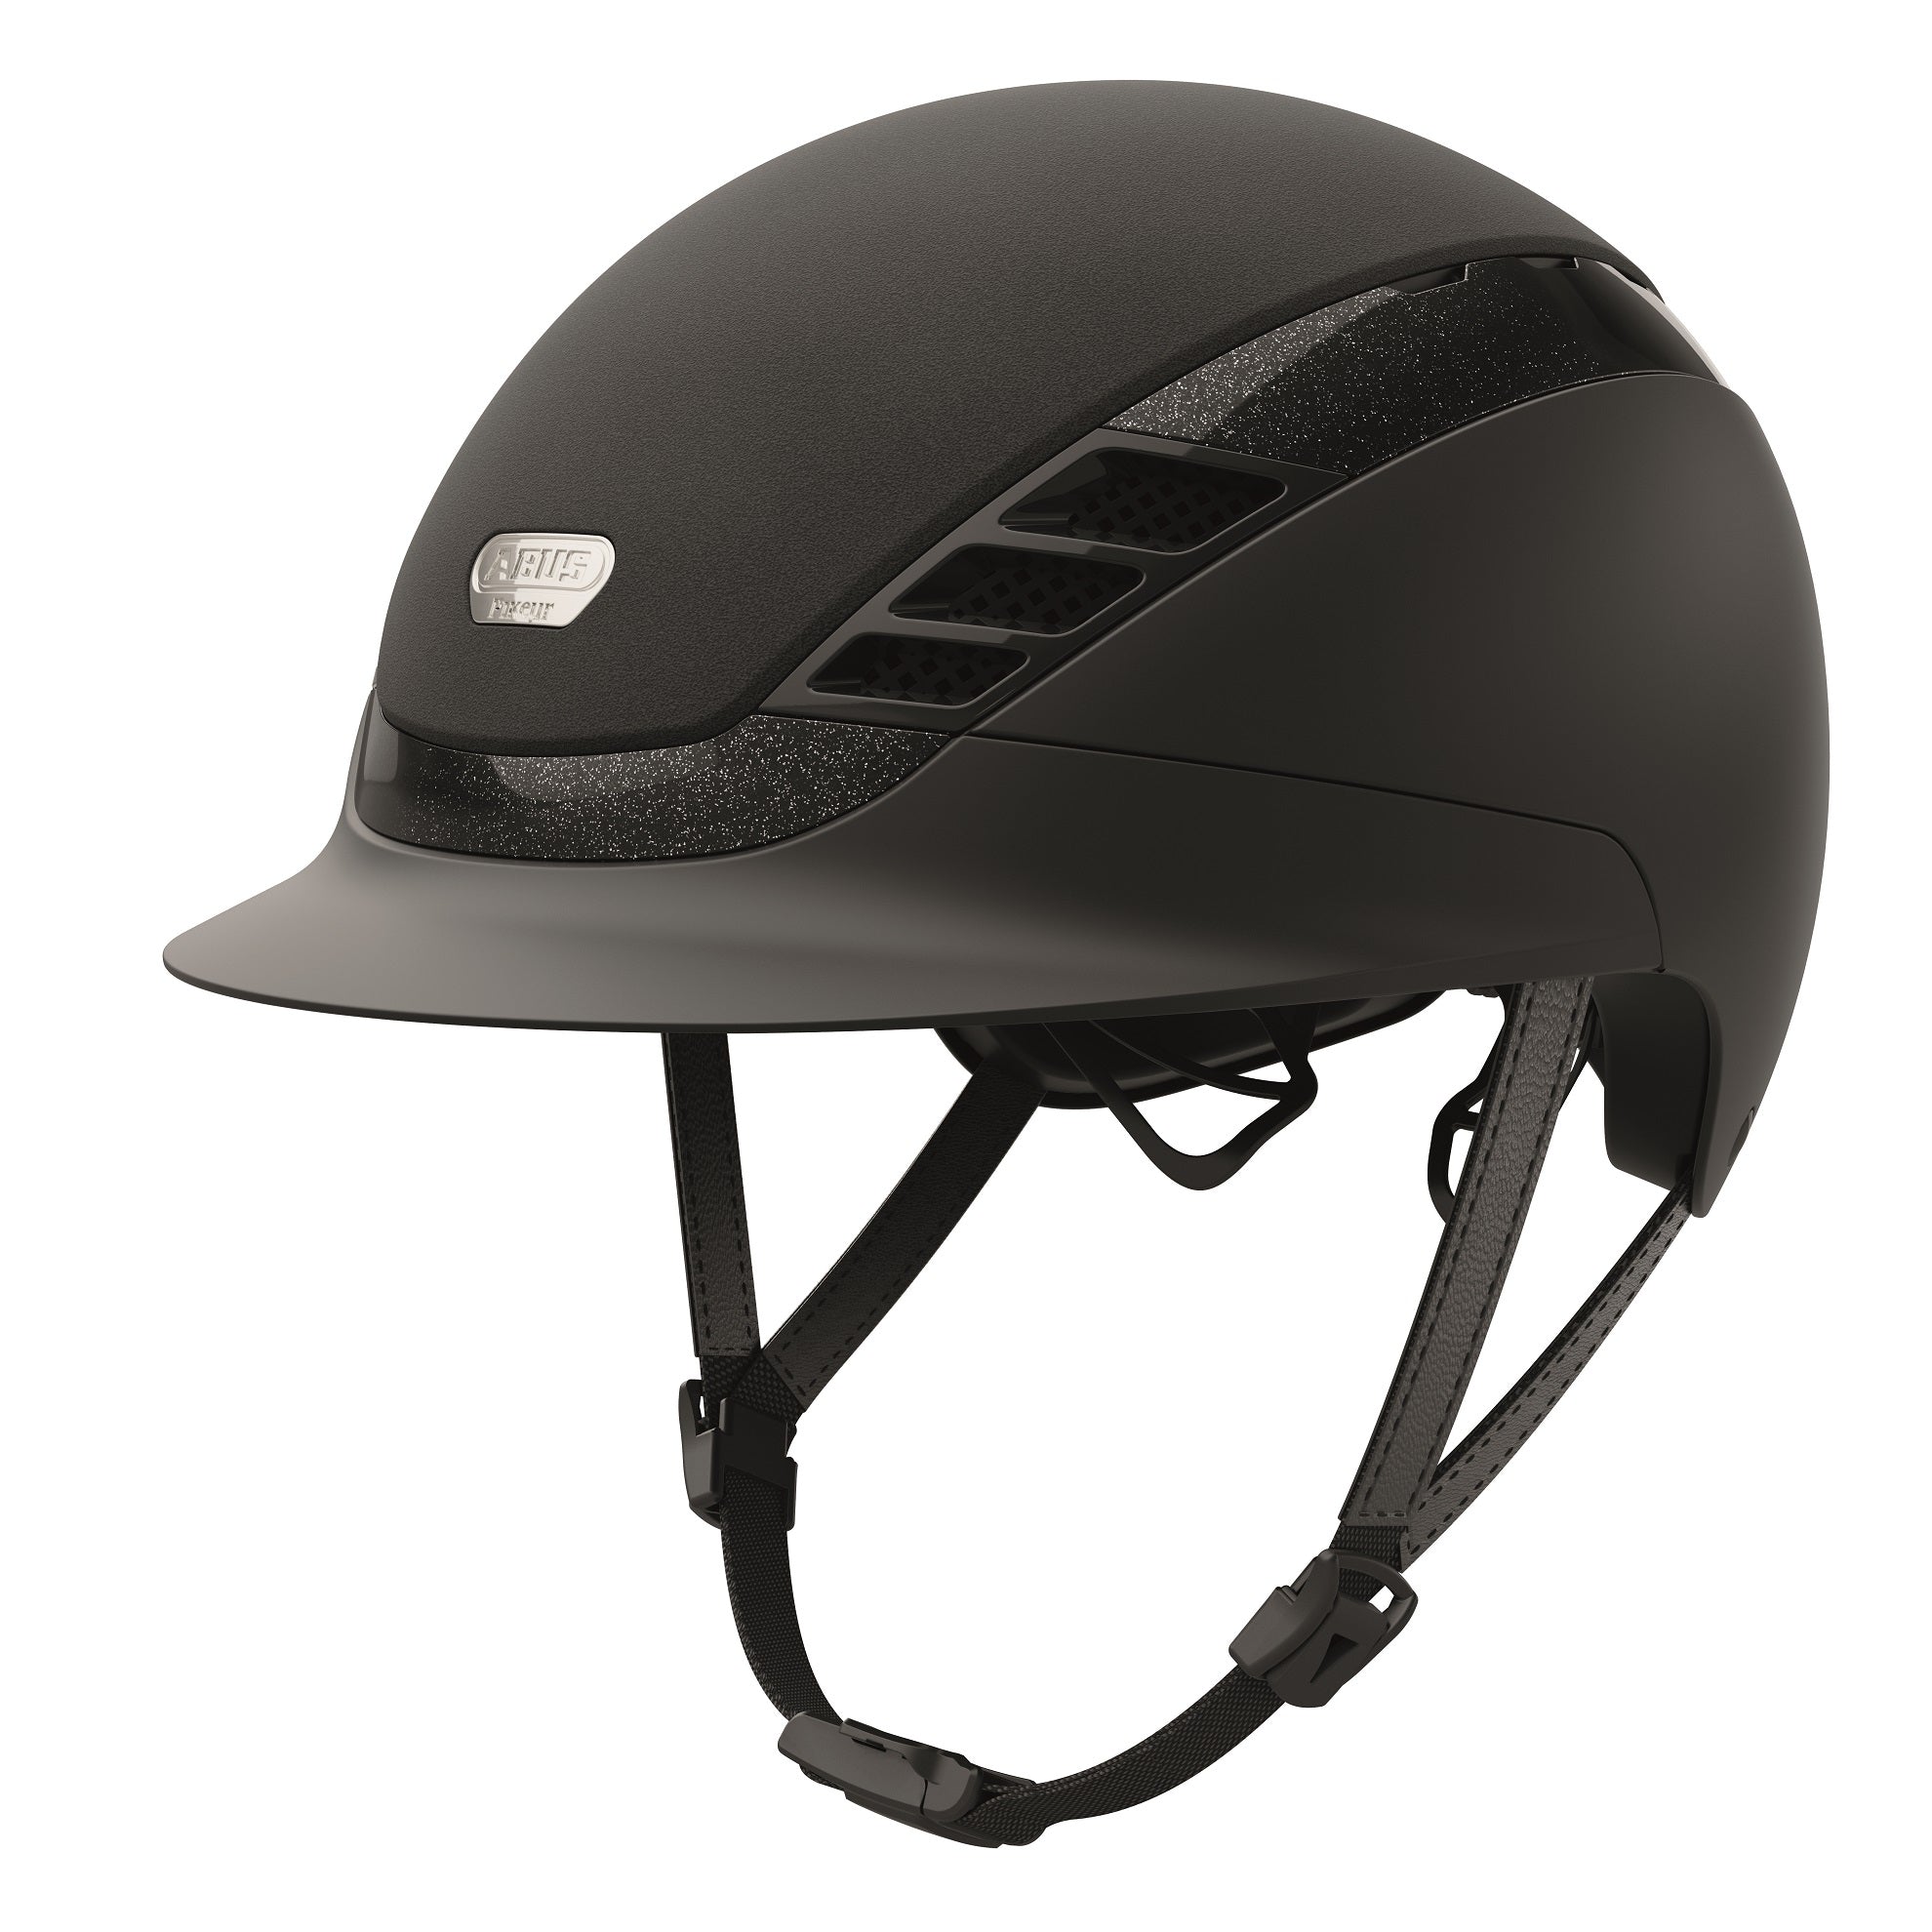 Abus AirLuxe Supreme Riding Helmet - due October